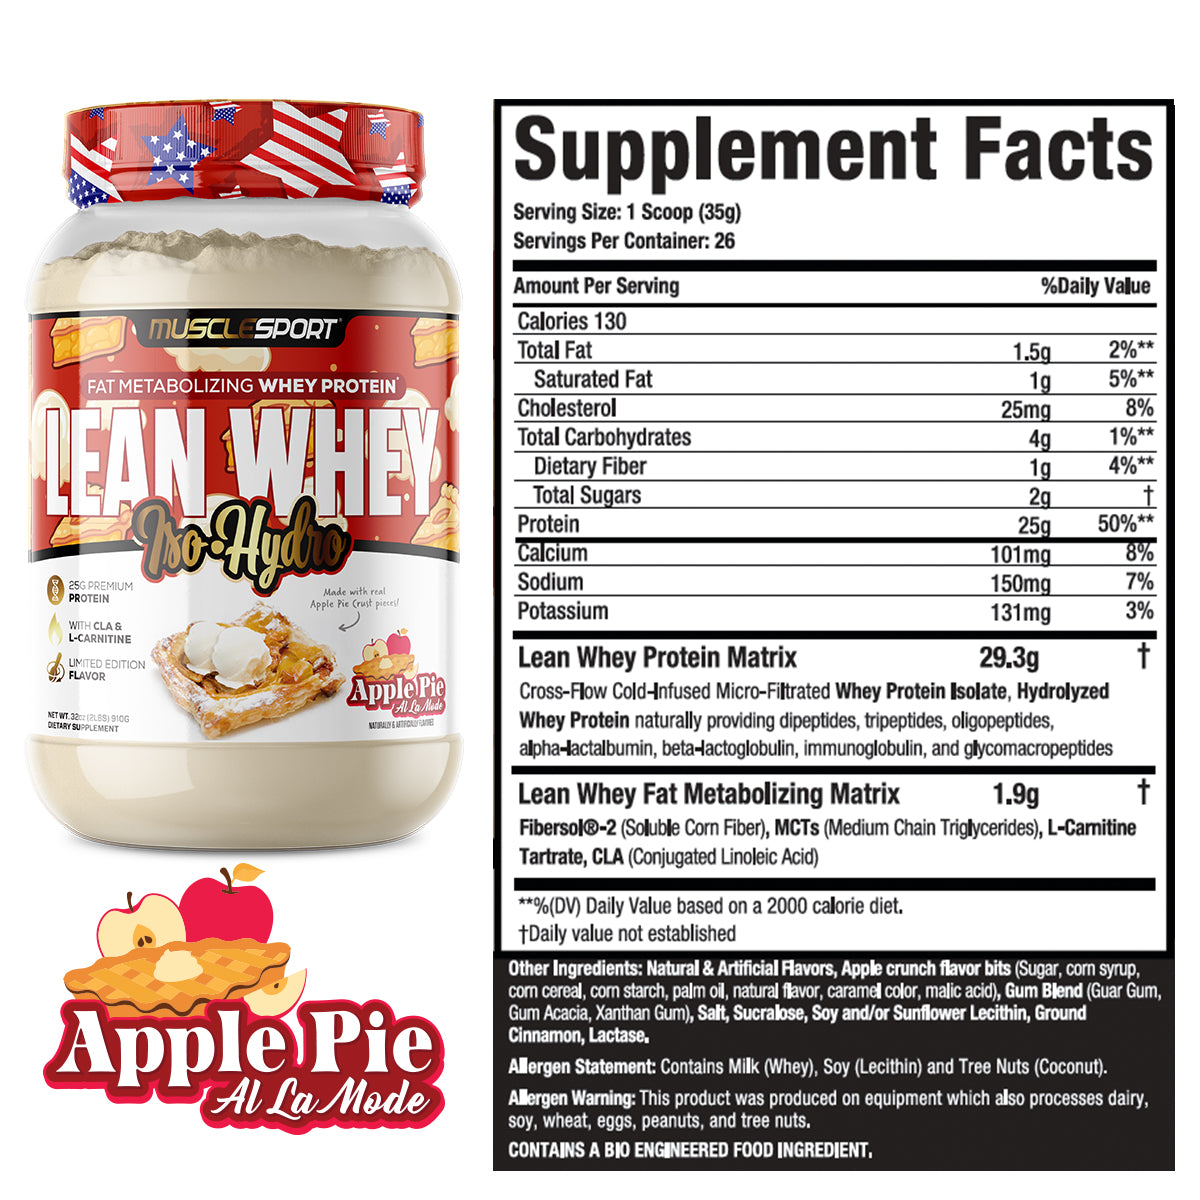 Apple Pie Lean Whey Supplement Facts